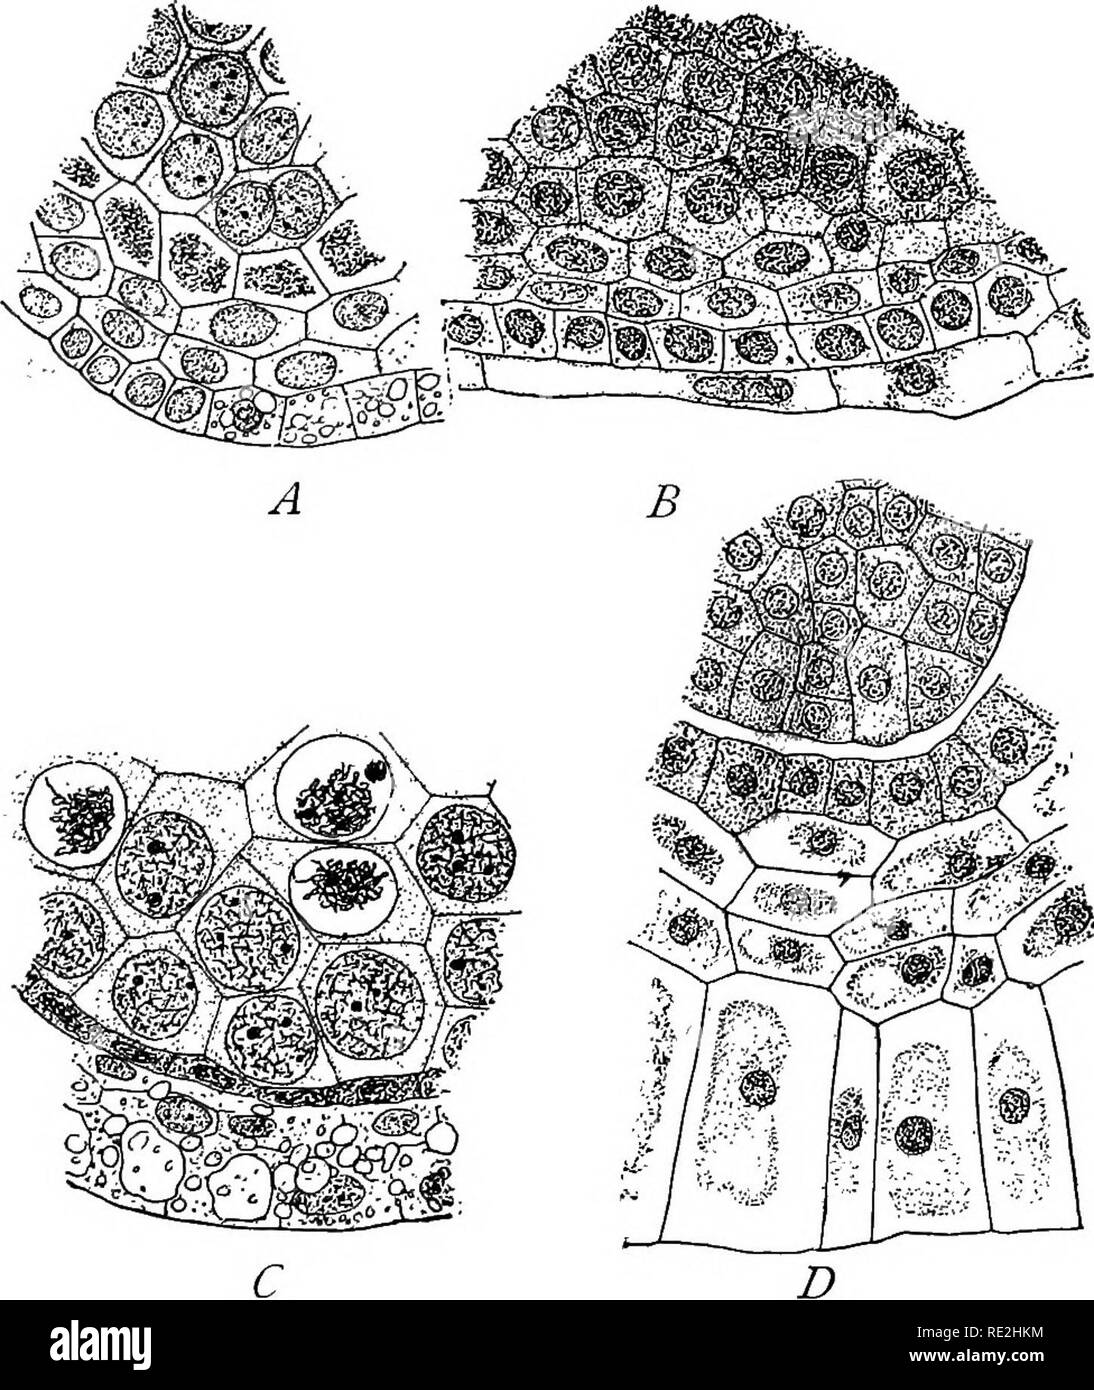 . Morphology of spermatophytes. [Part I. Gymnosperms]. Gymnosperms; Plant morphology. CONIPERALES 67 cata Canadensis are in the mother-cell stage in October, but how much earlier they reach this stage he did not discover (Fig. 52). In this condition the sporangia pass the winter, and during the. Fig. 52.—Winter condition of microsporangia; ^, cross section of sporangium of/¥?i«5 Larioio, coUeoted October 1st; -S, same, collected January 3d ; 0, same, collected April 4th; J), sporangium of Taxus baccata Canadensis, collected October 1st.— After ClIAMEEELAIN. following spring (about May 1st in t Stock Photo